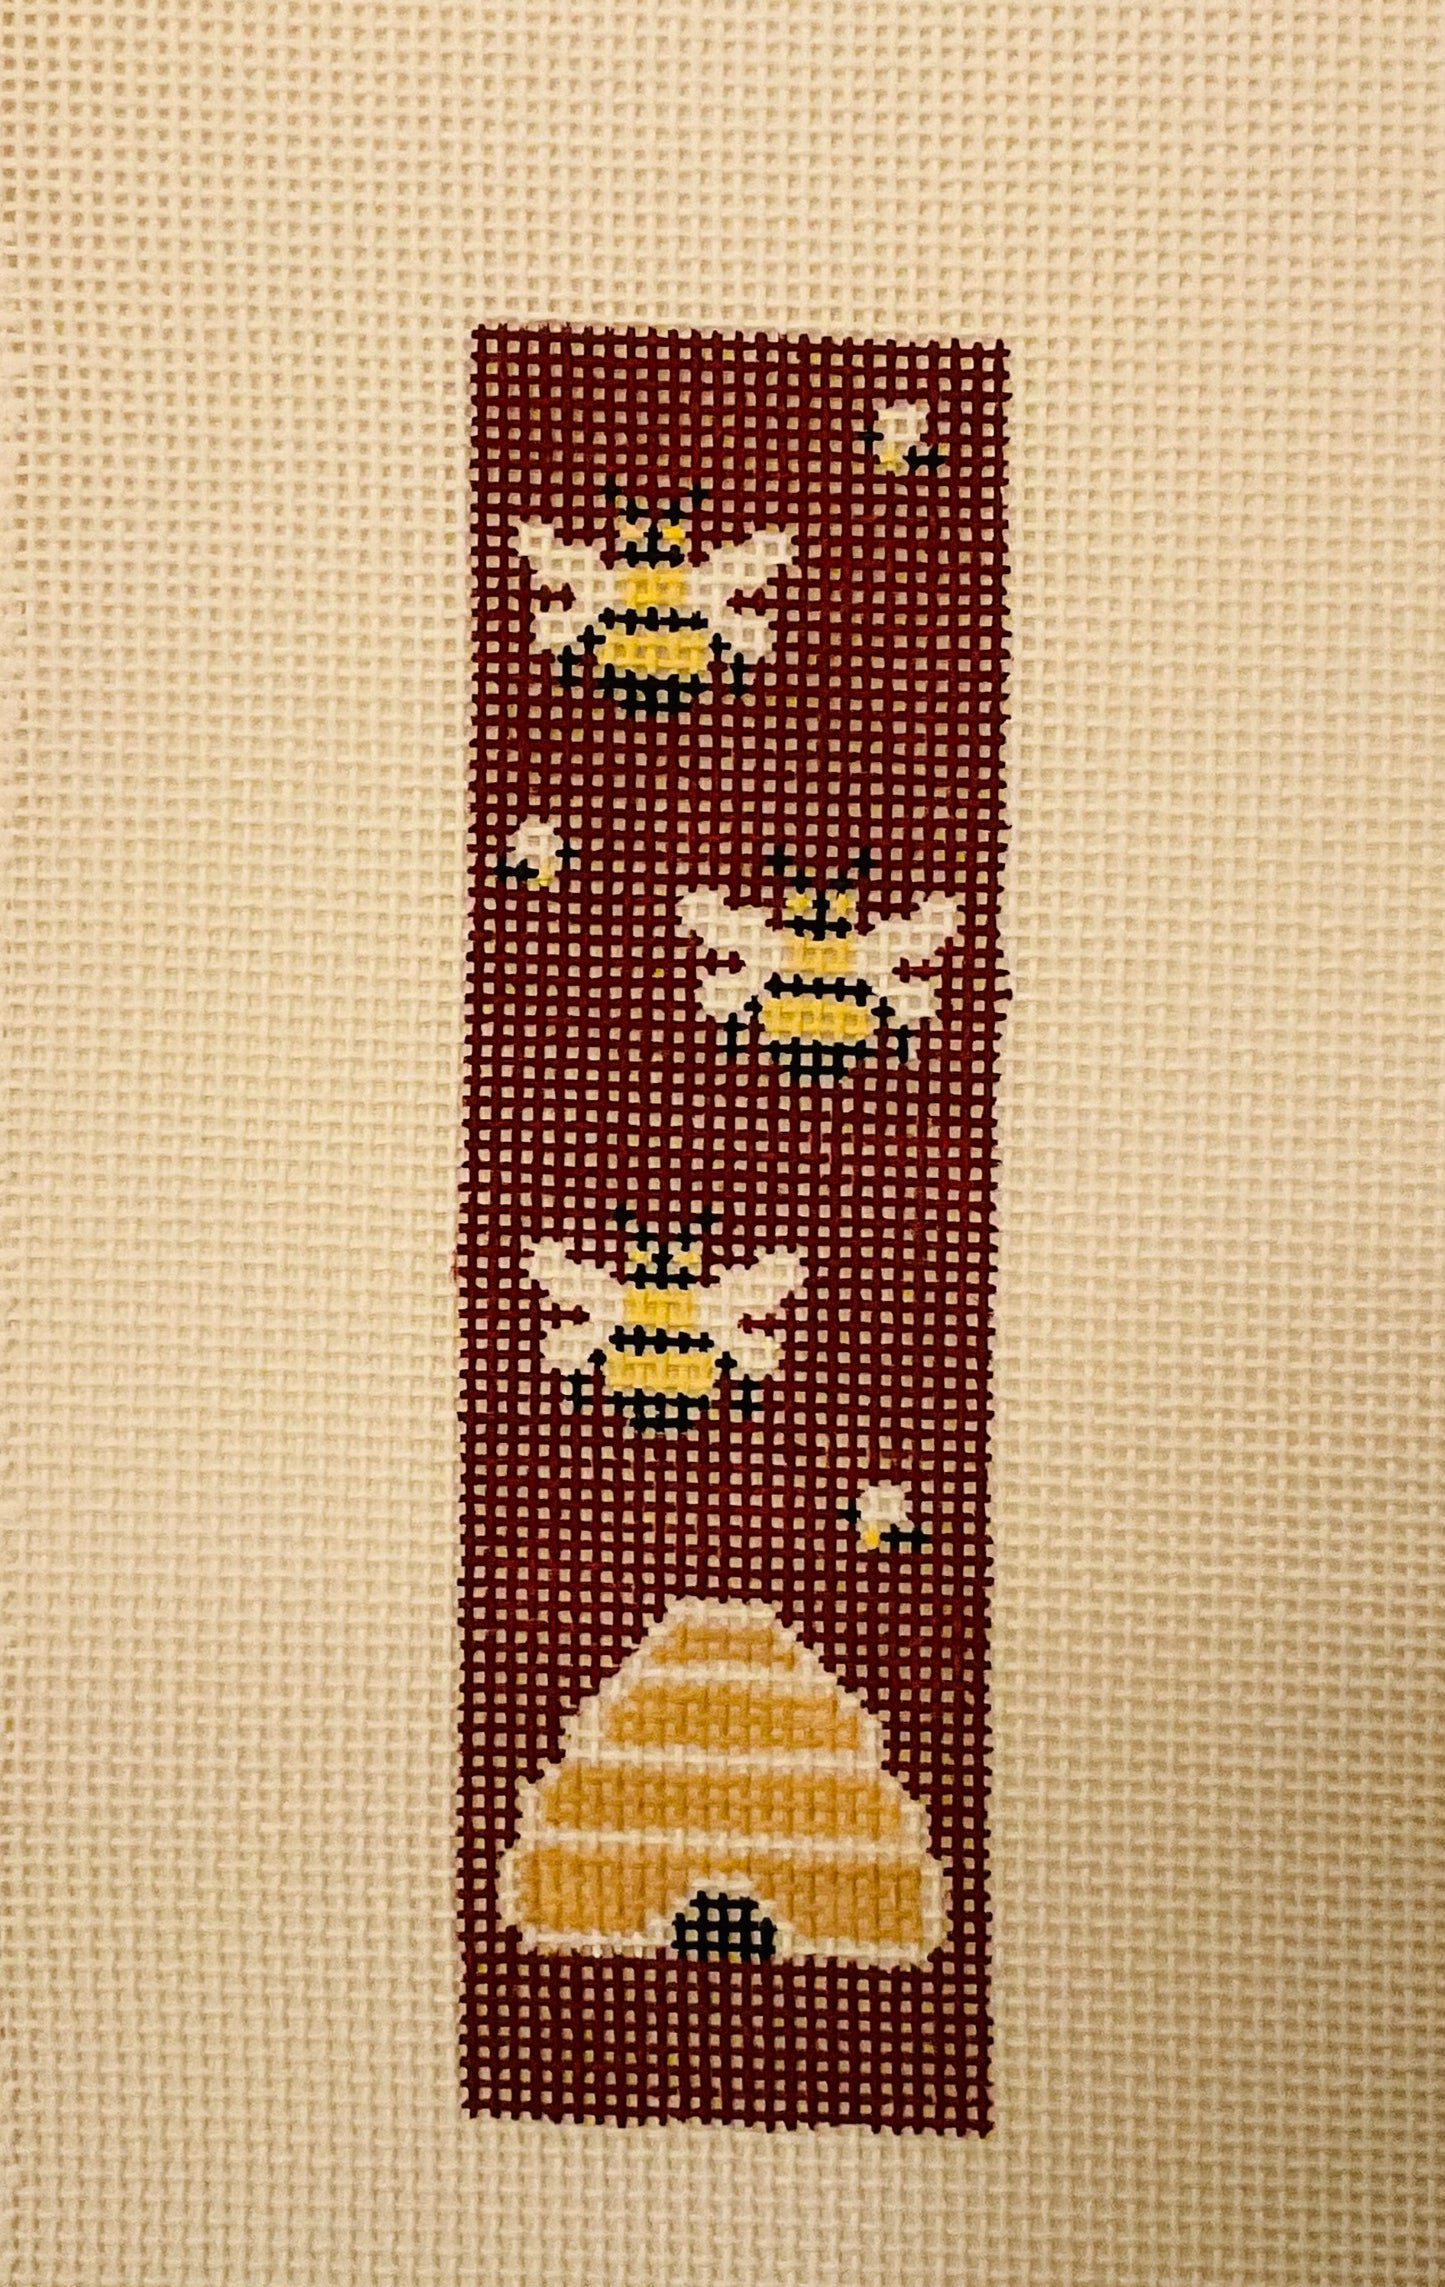 Bookmark Three Bees with Hive